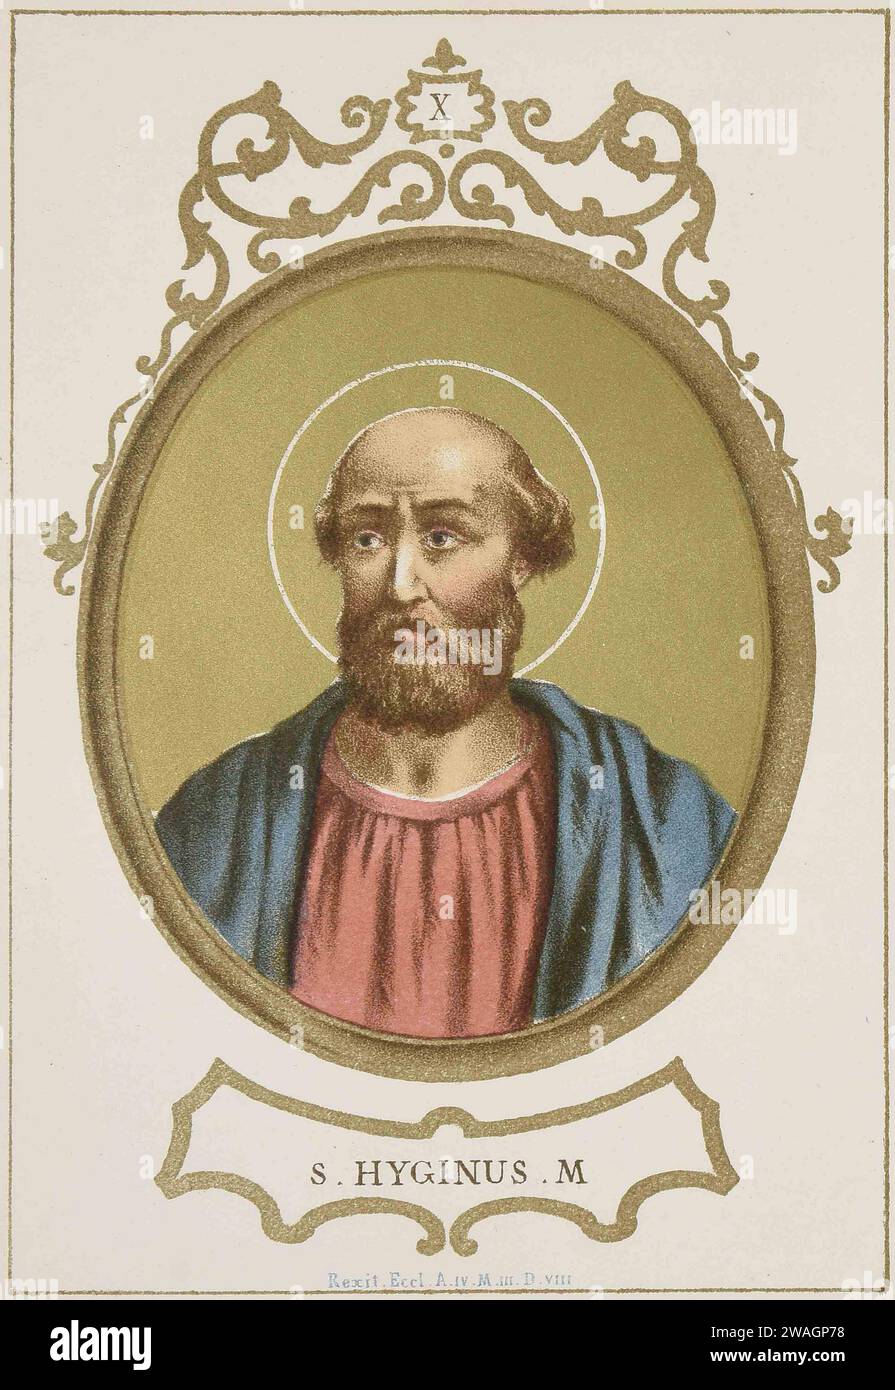 An 1879 illustration of Pope Hyginus, who was pontiff from AD136 to AD140. He was the ninth pope. He was Greek and it was he that introduced the idea of godparents to help baptised children during their Christian life and duties. Stock Photo